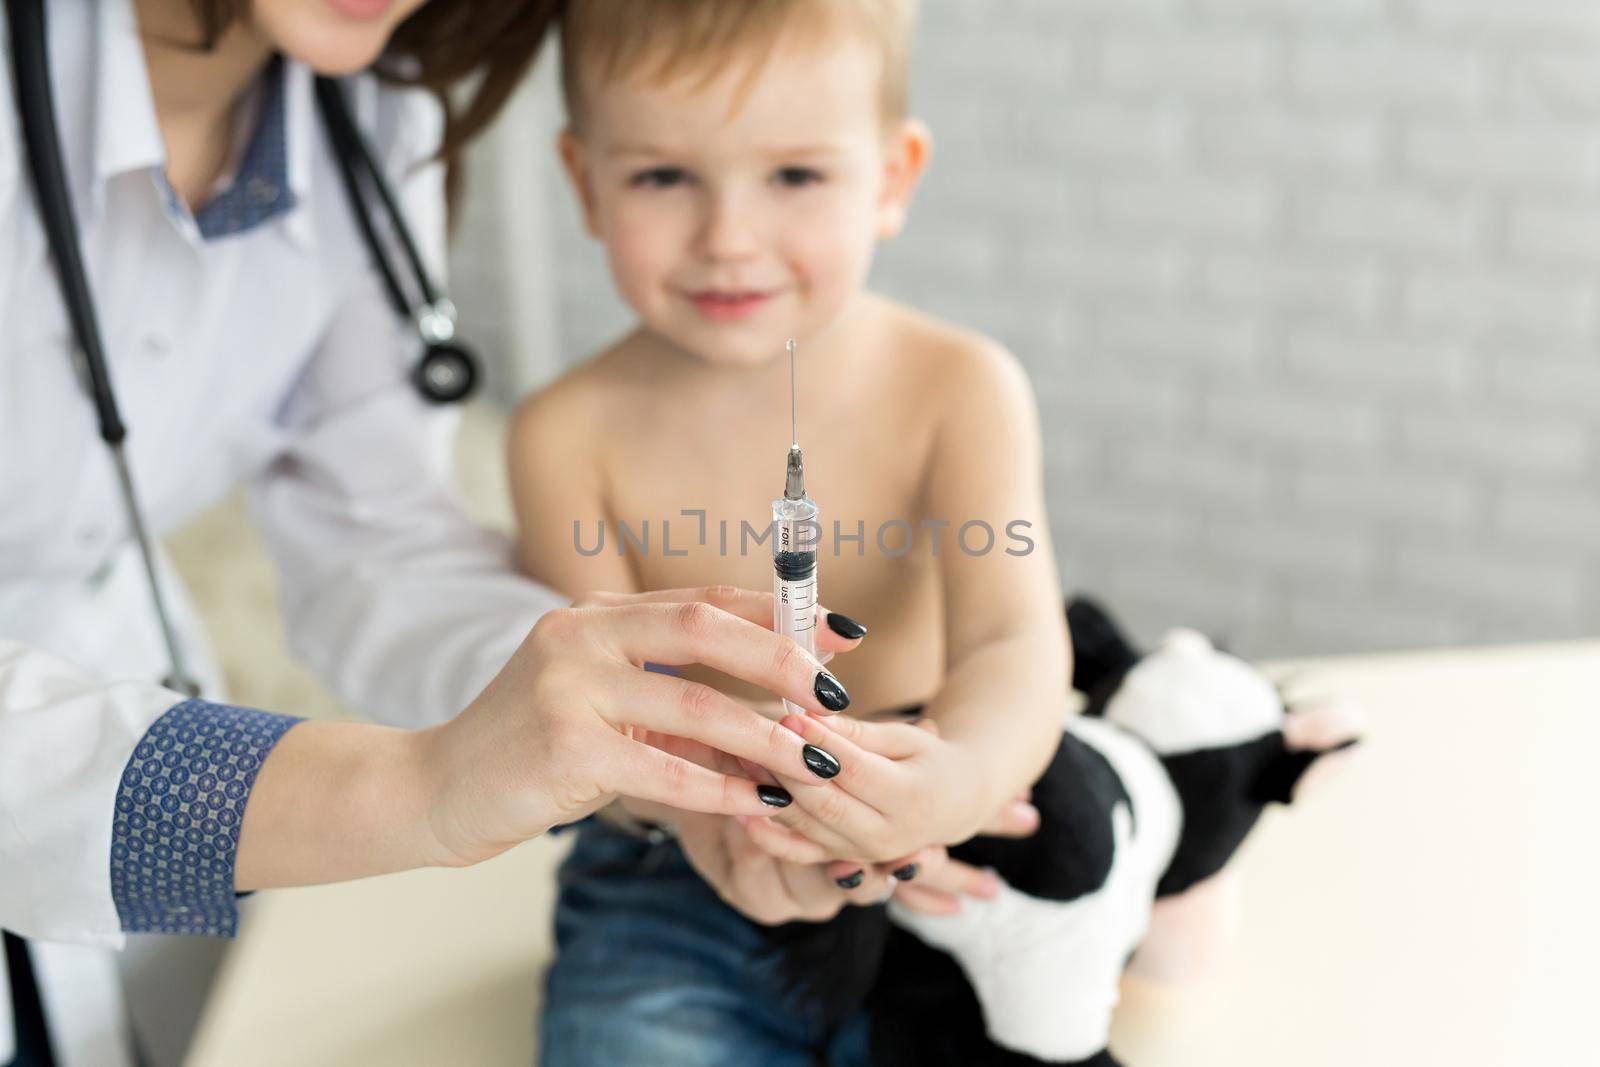 Doctor pediatrician plays before the injection with the boy by StudioPeace